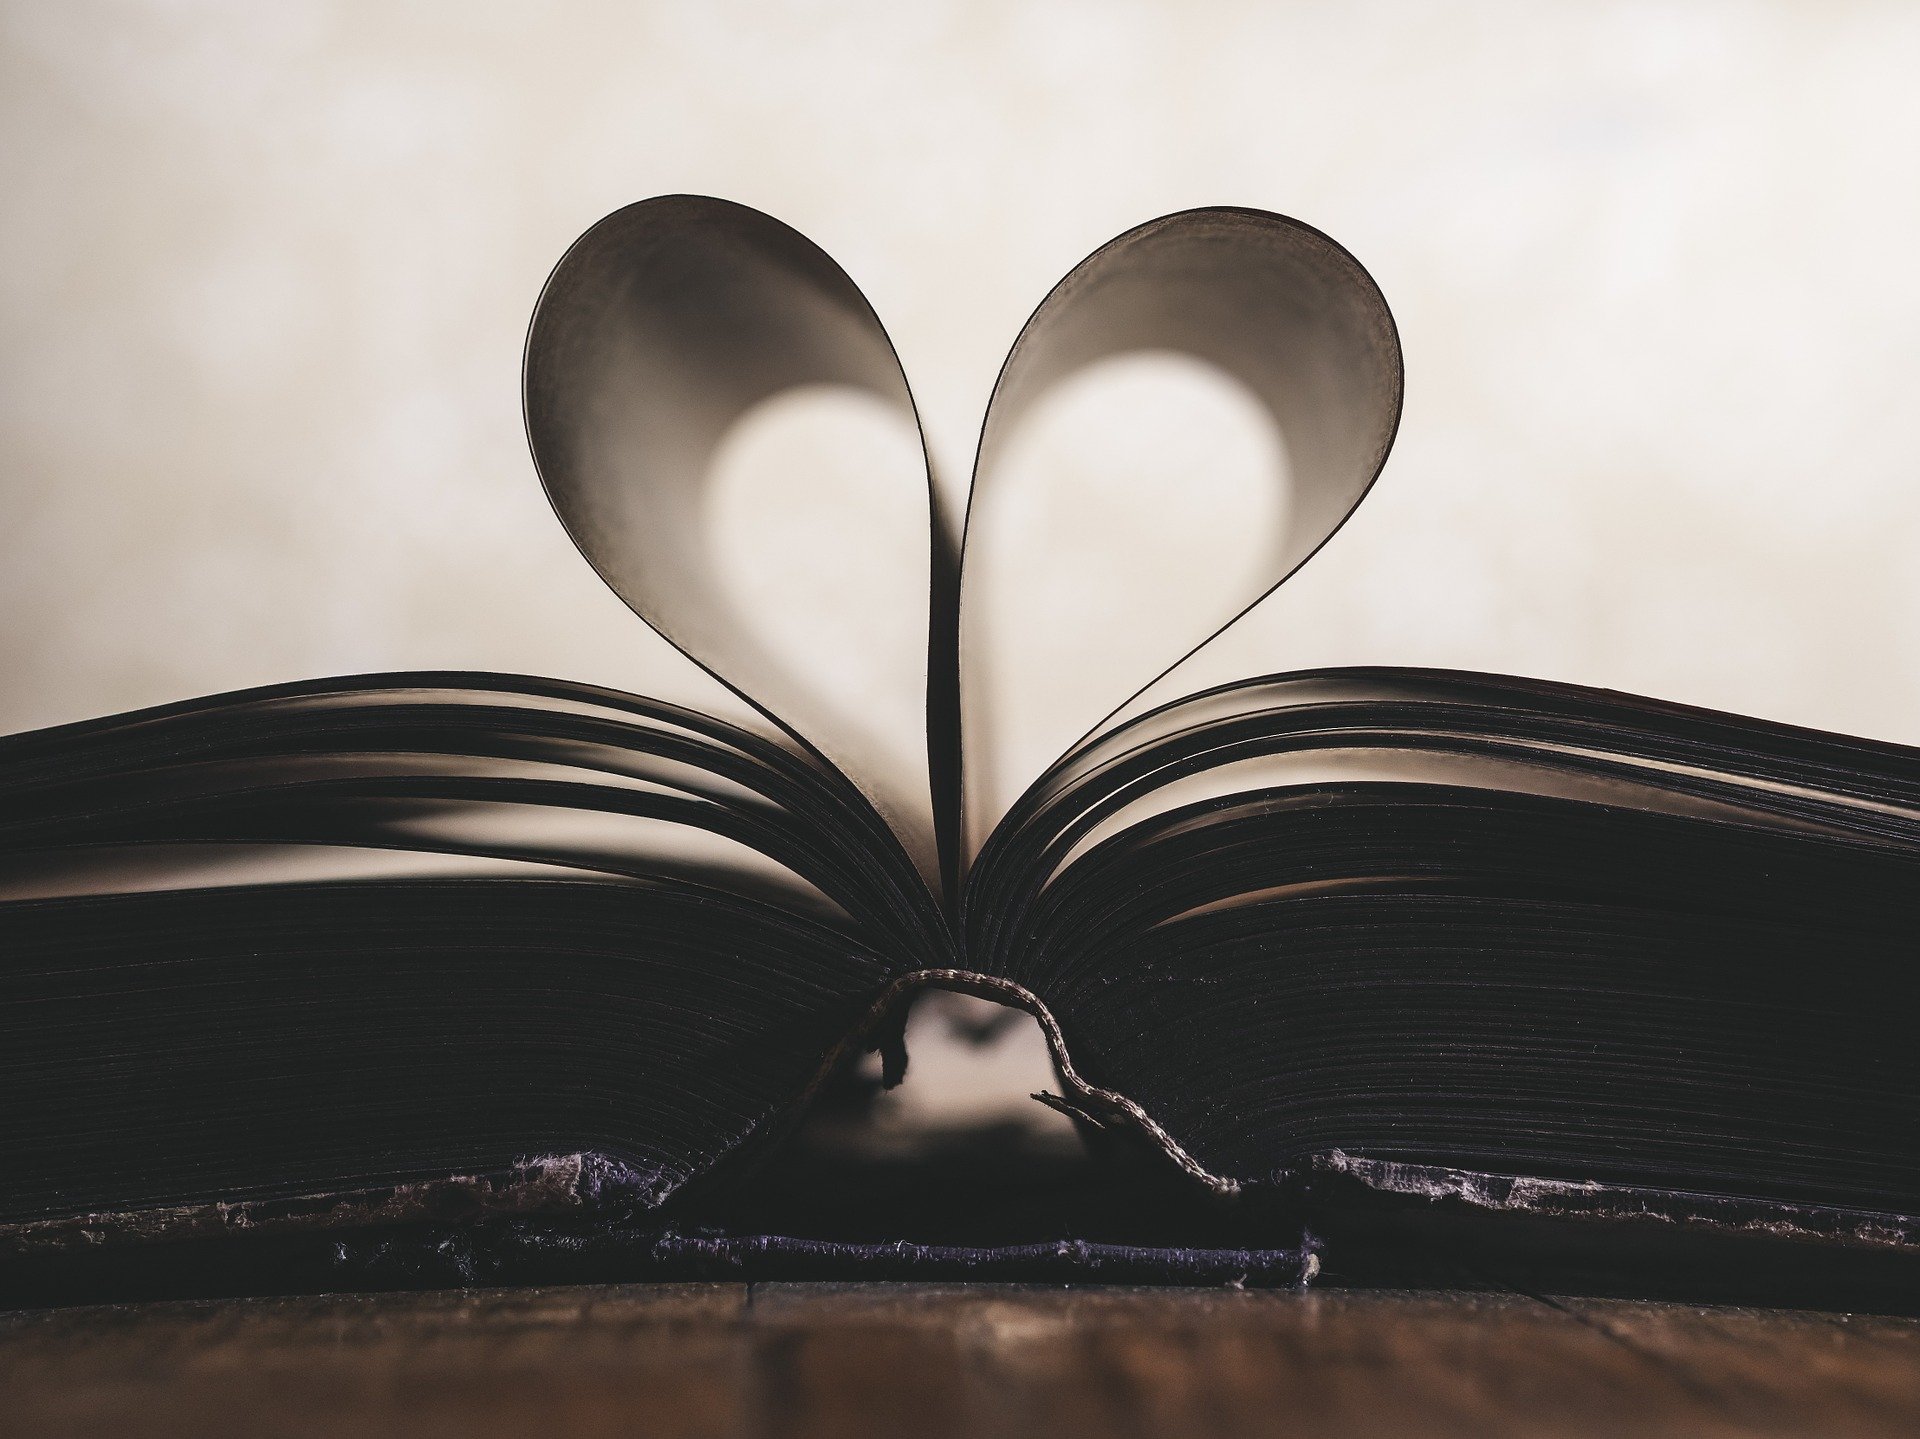 Open book with pages making a heart shape